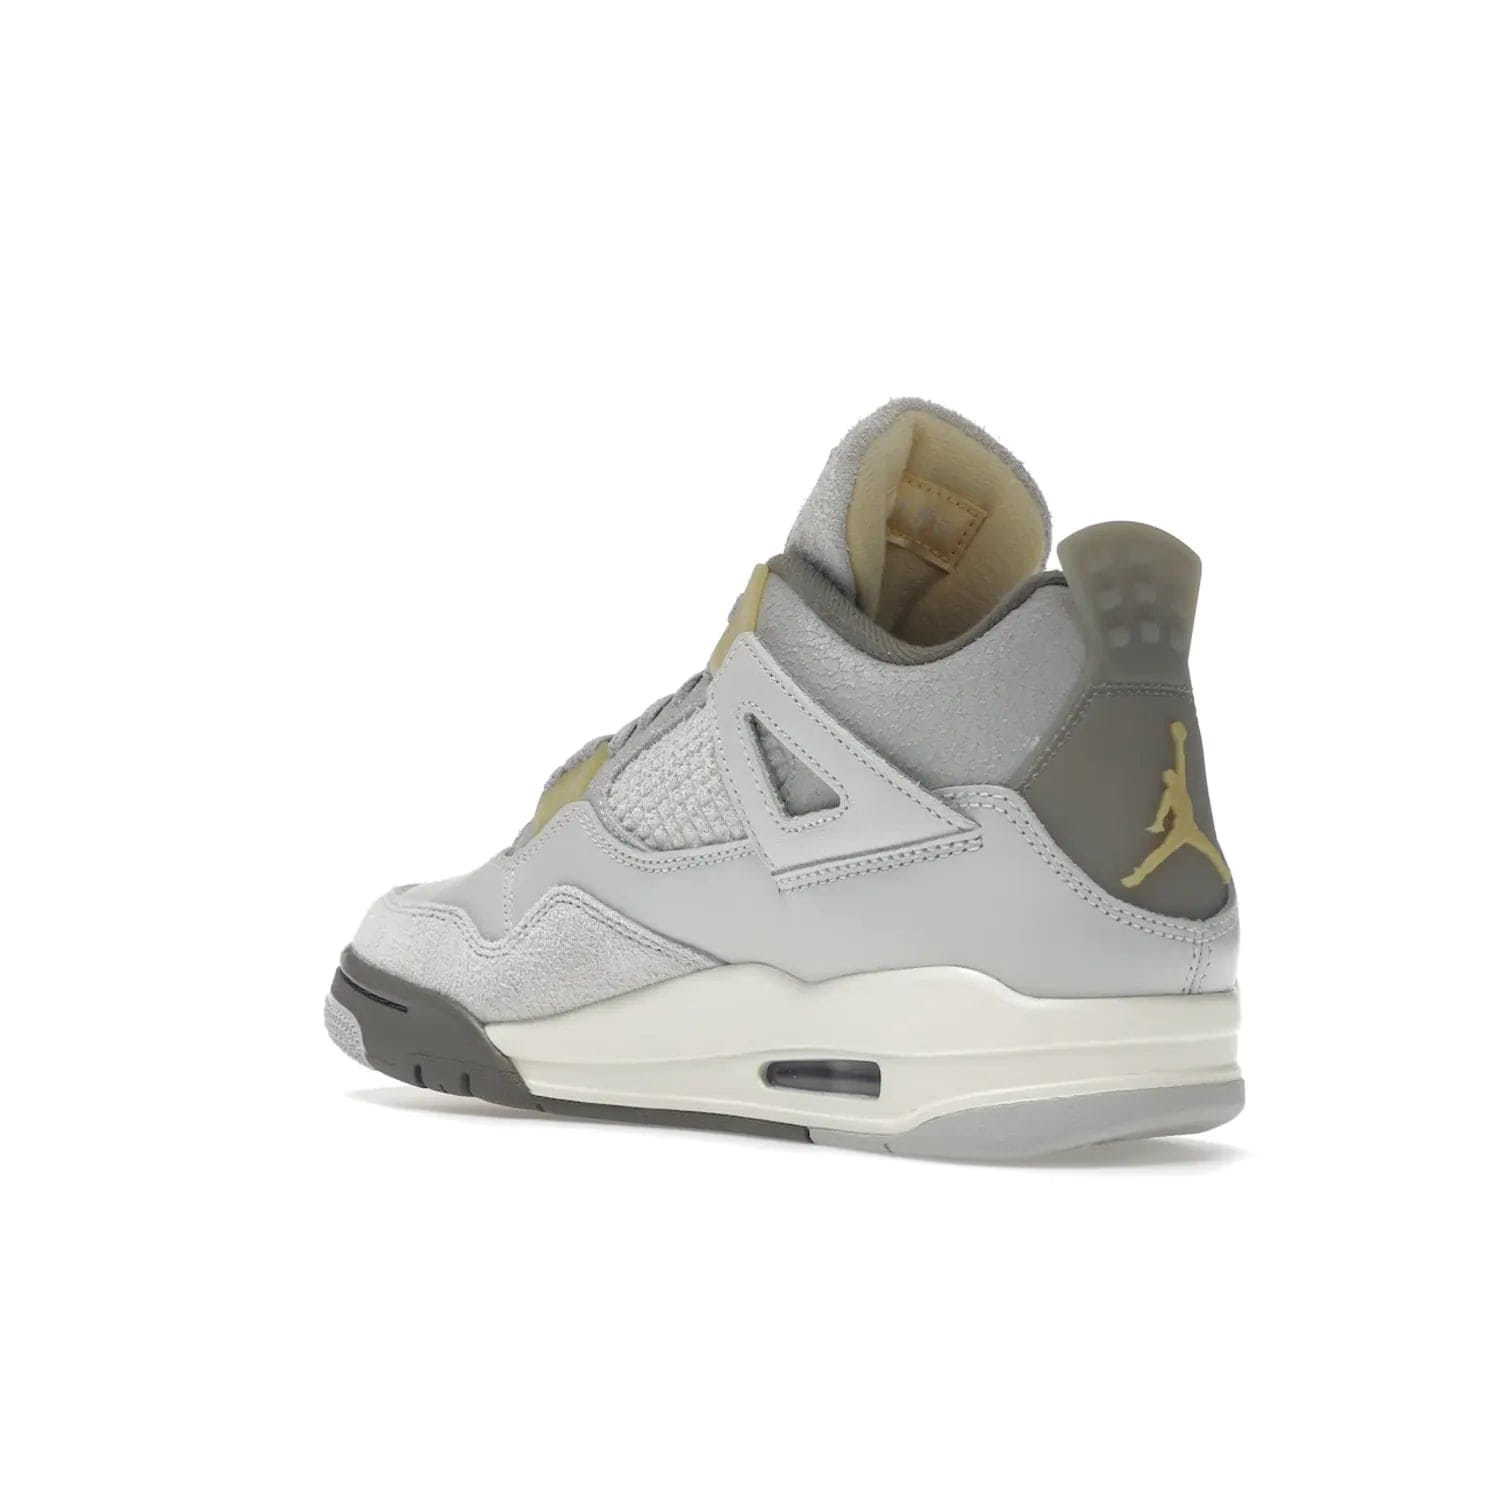 Jordan 4 Retro SE Craft Photon Dust - Image 24 - Only at www.BallersClubKickz.com - Upgrade your shoe collection with the Air Jordan 4 Retro SE Craft Photon Dust. This luxurious sneaker features a combination of suede and leather with unique grey tones like Photon Dust, Pale Vanilla, Off White, Grey Fog, Flat Pewter, and Sail. Available February 11, 2023.